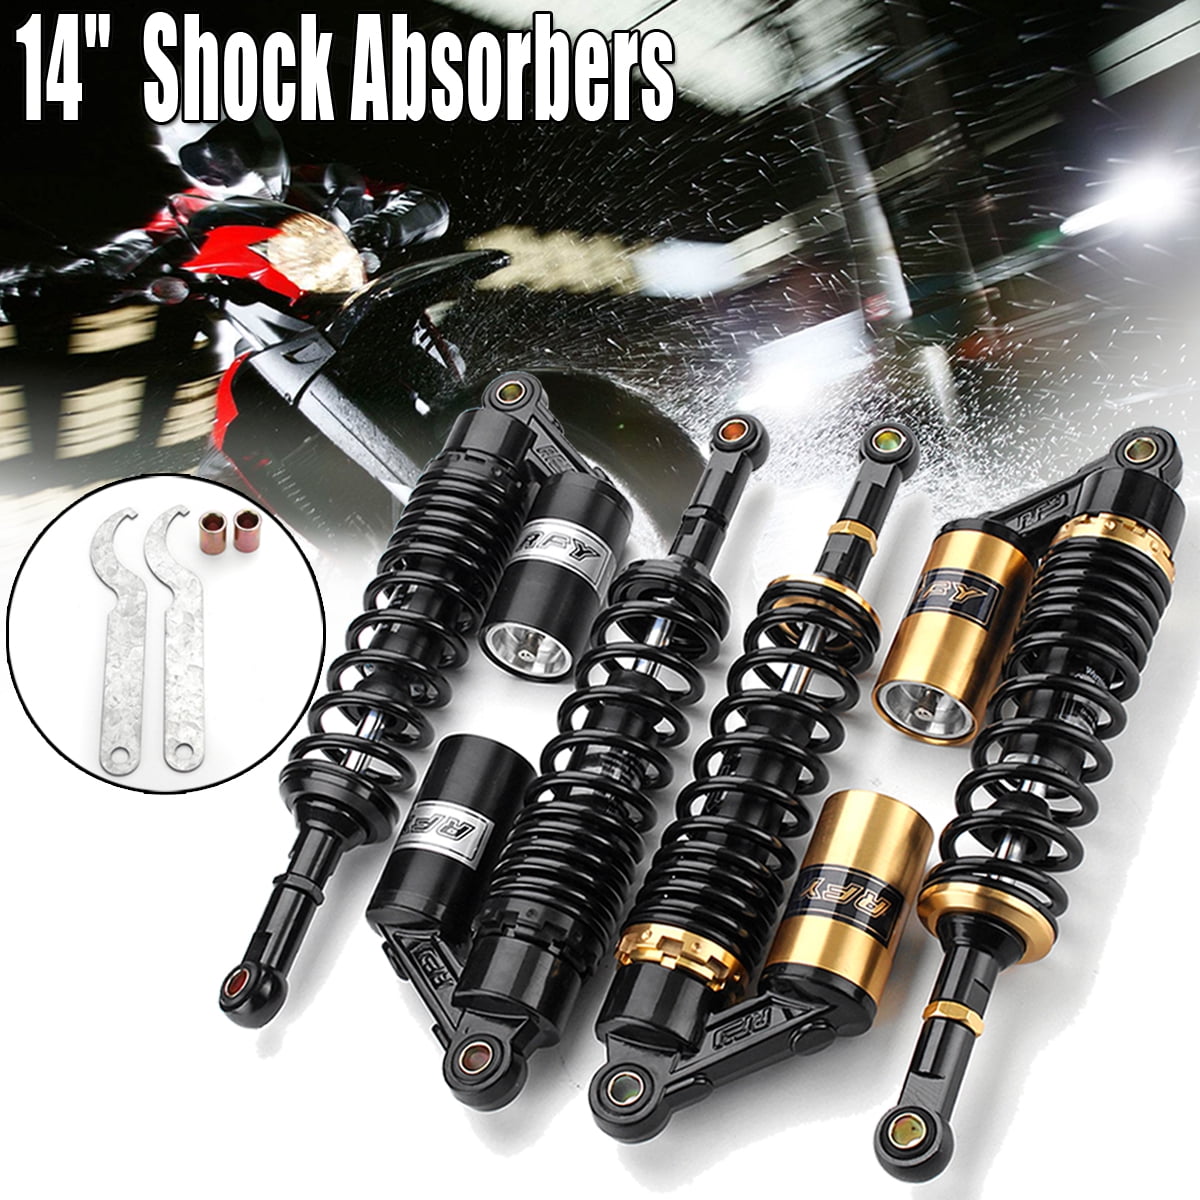 Motorcycle Shock Absorber XXG Motorcycle Rear Shock Absorber One PC 14 360mm Universal Shock Absorbers Fit for ATV/Motorcycles and Quad 